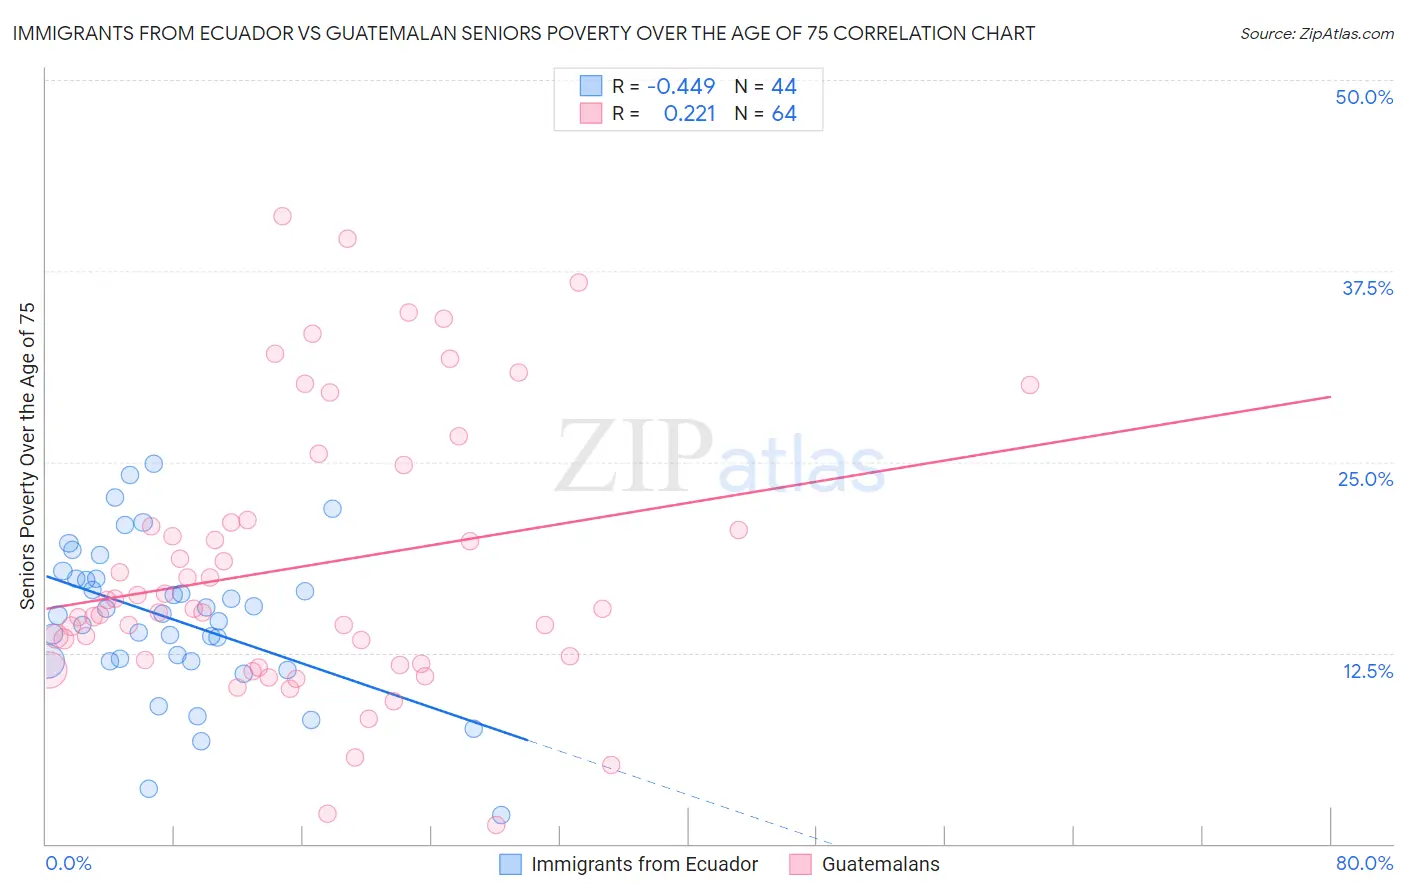 Immigrants from Ecuador vs Guatemalan Seniors Poverty Over the Age of 75